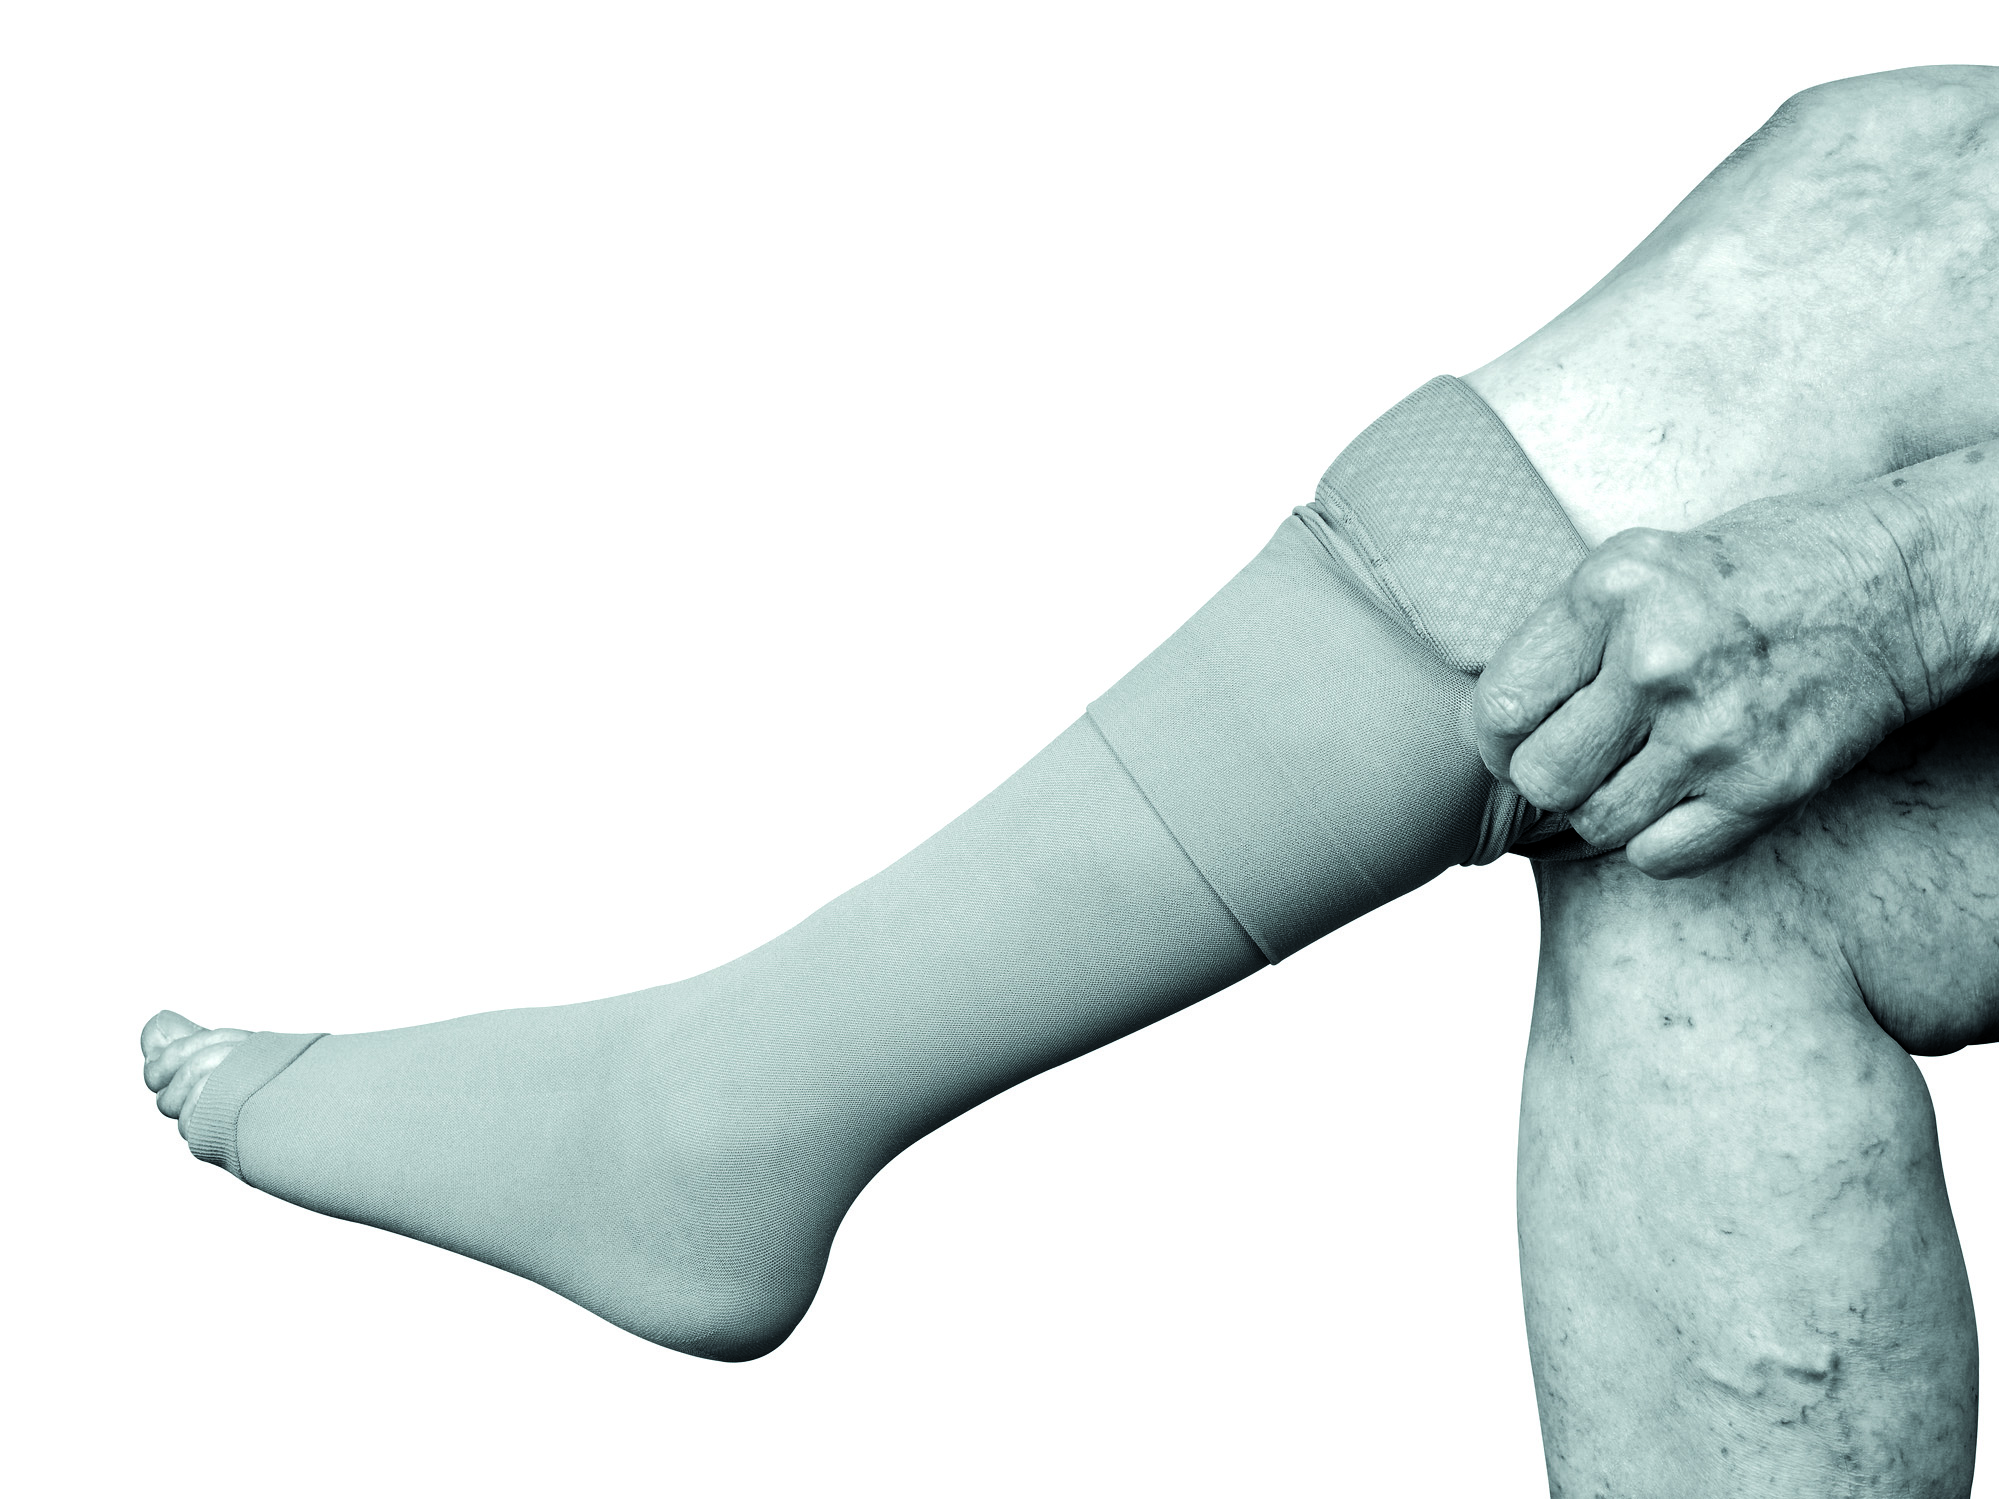 Compression garments that do not compress the foot and heel area may  improve treatment adherence, study finds